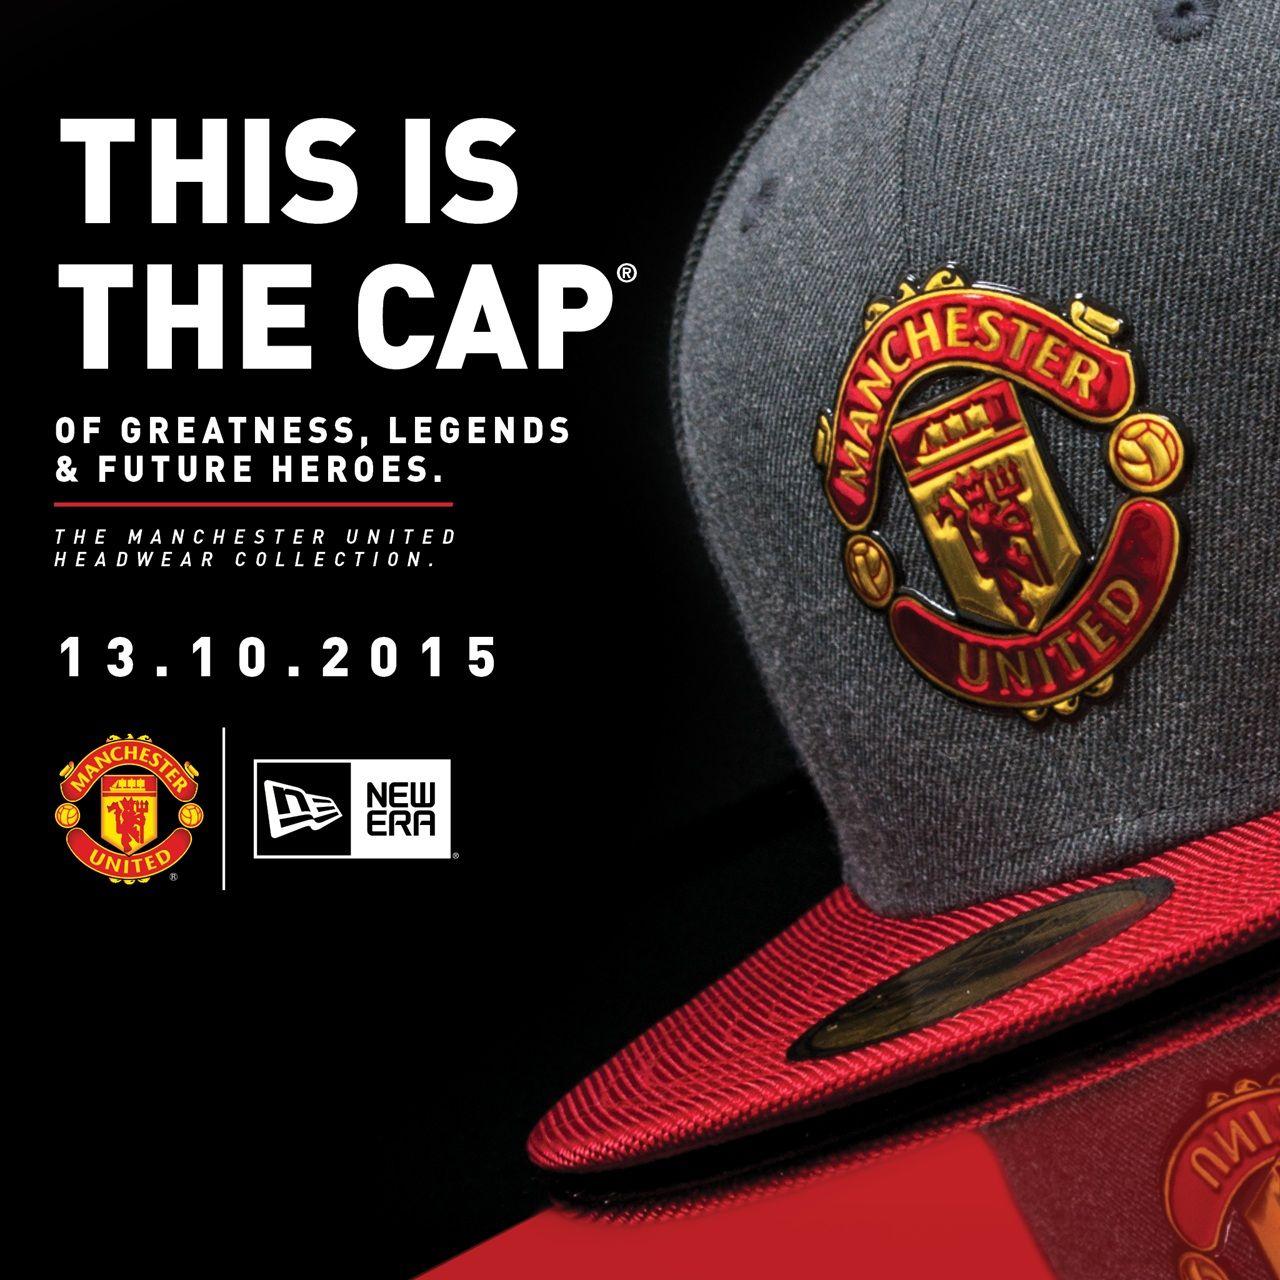 Manchester United and New Era announce global partnership